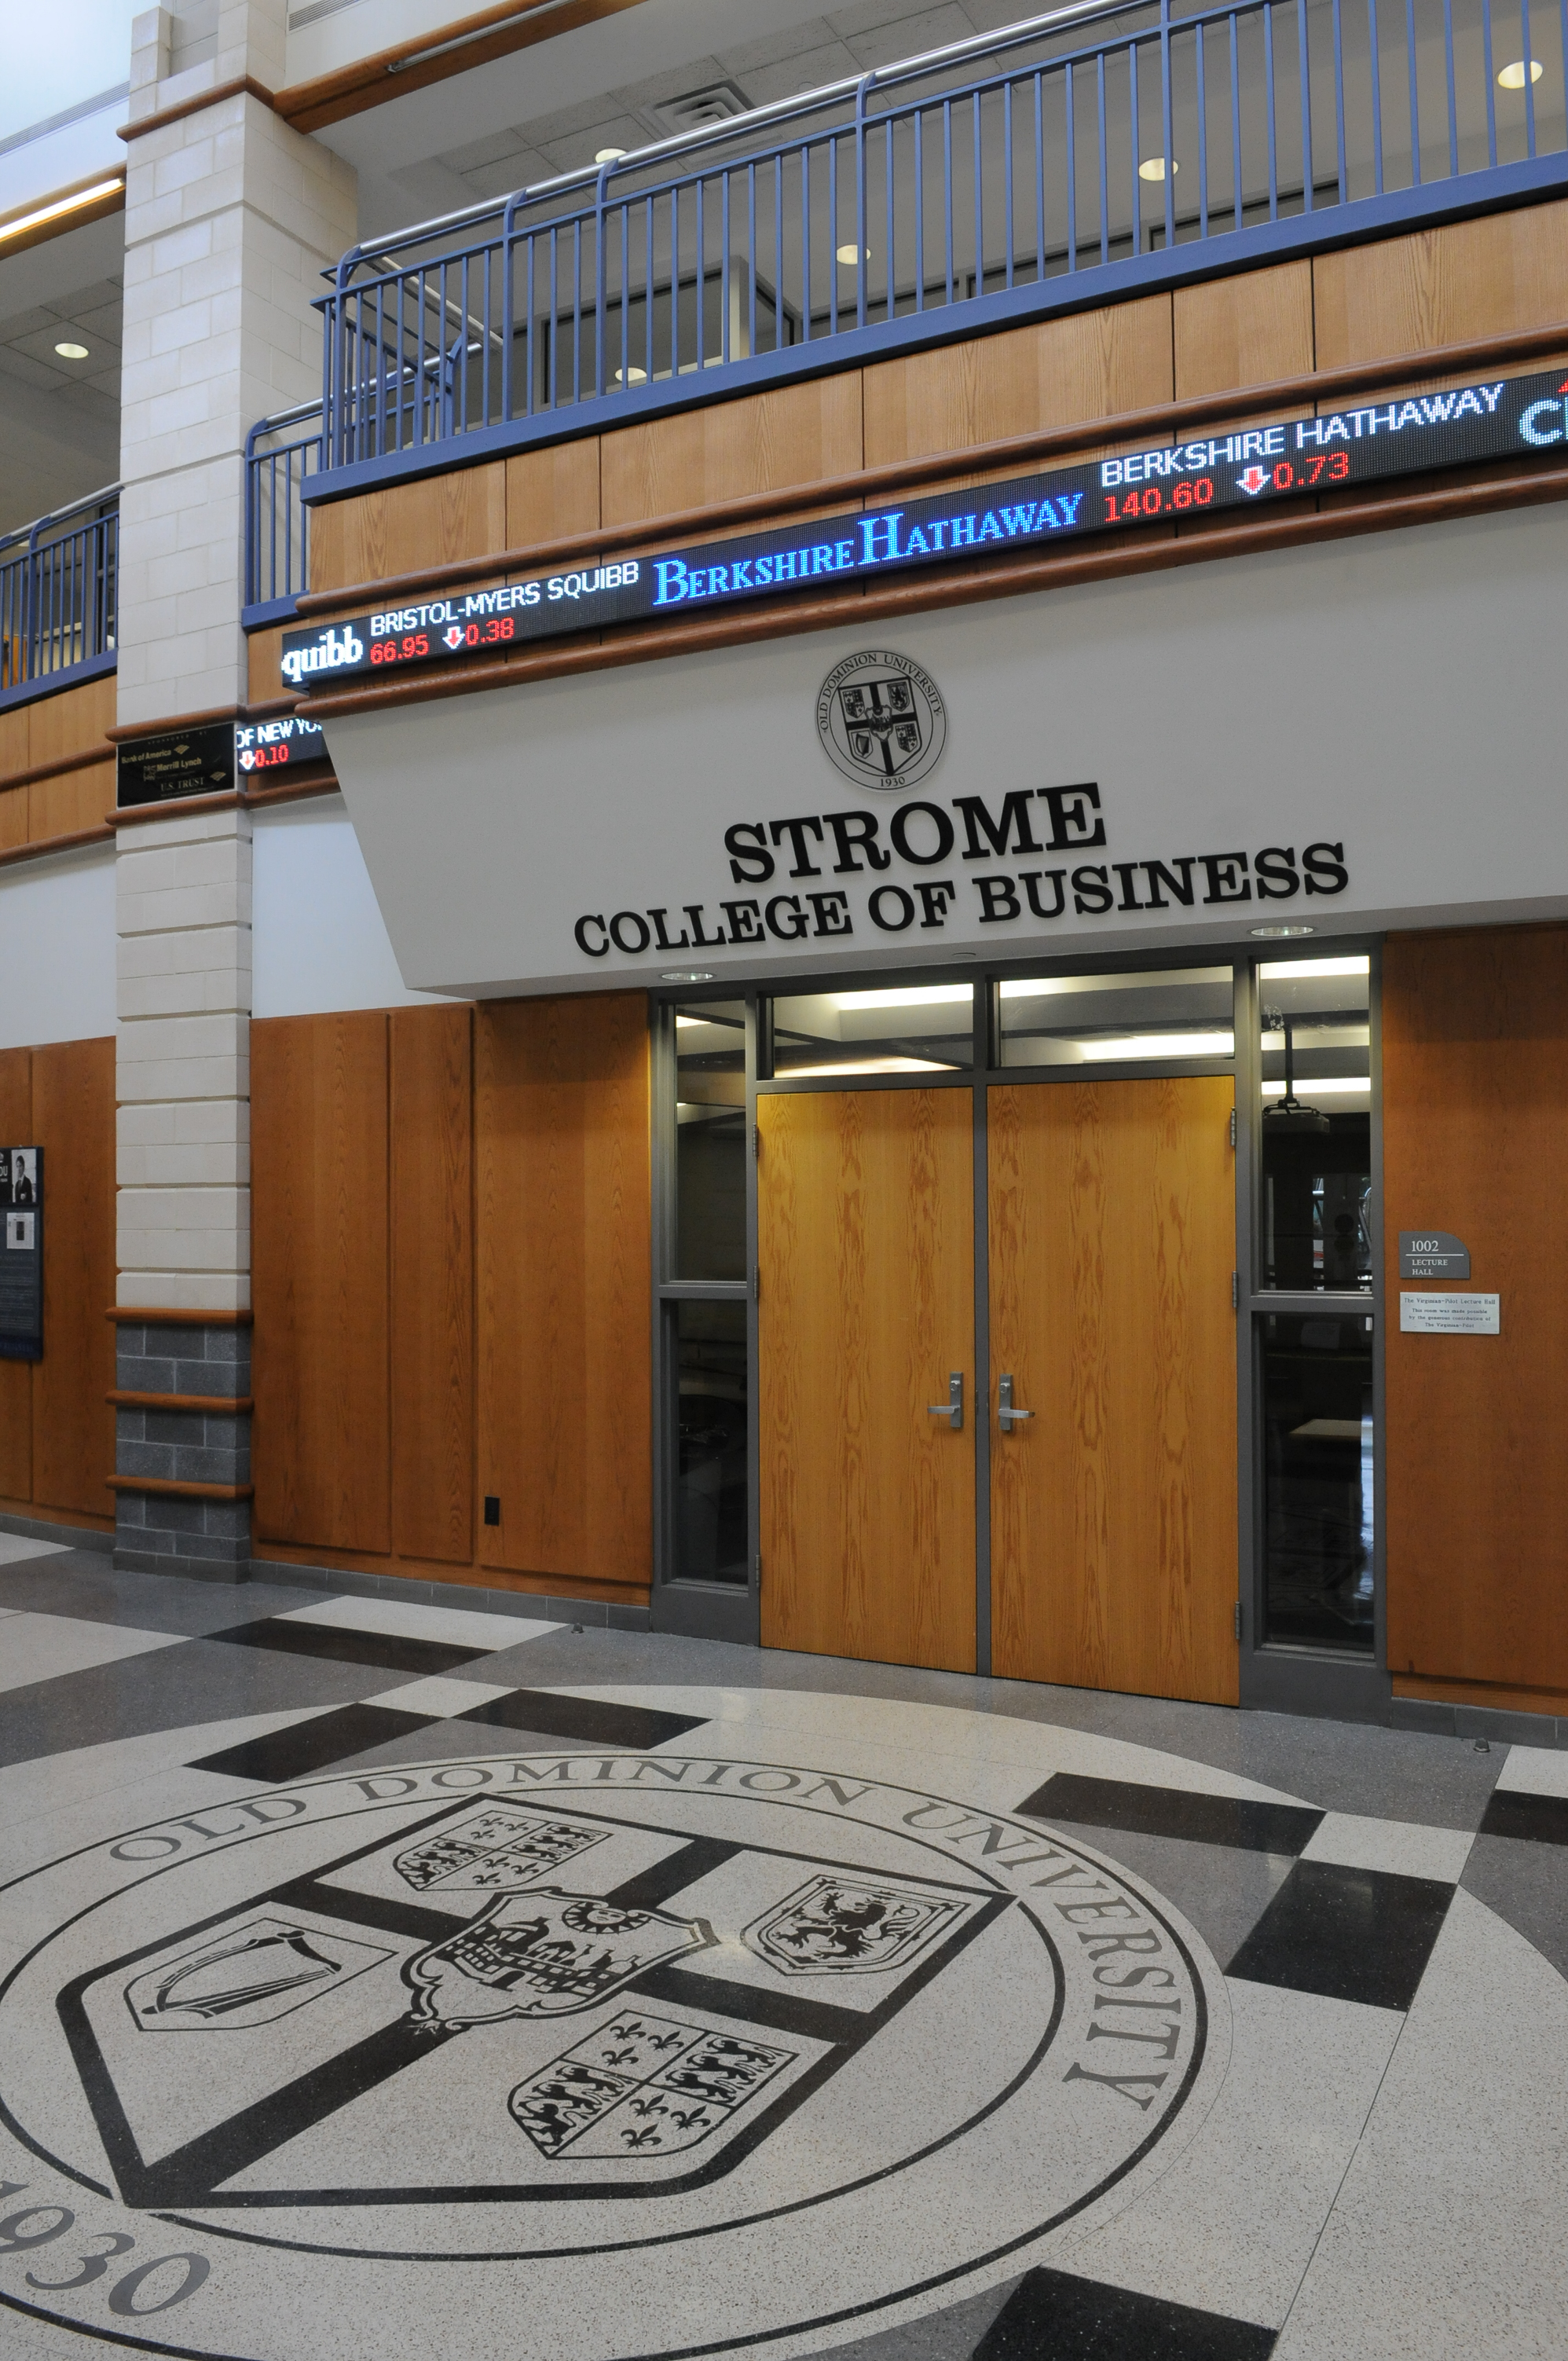 College of Business